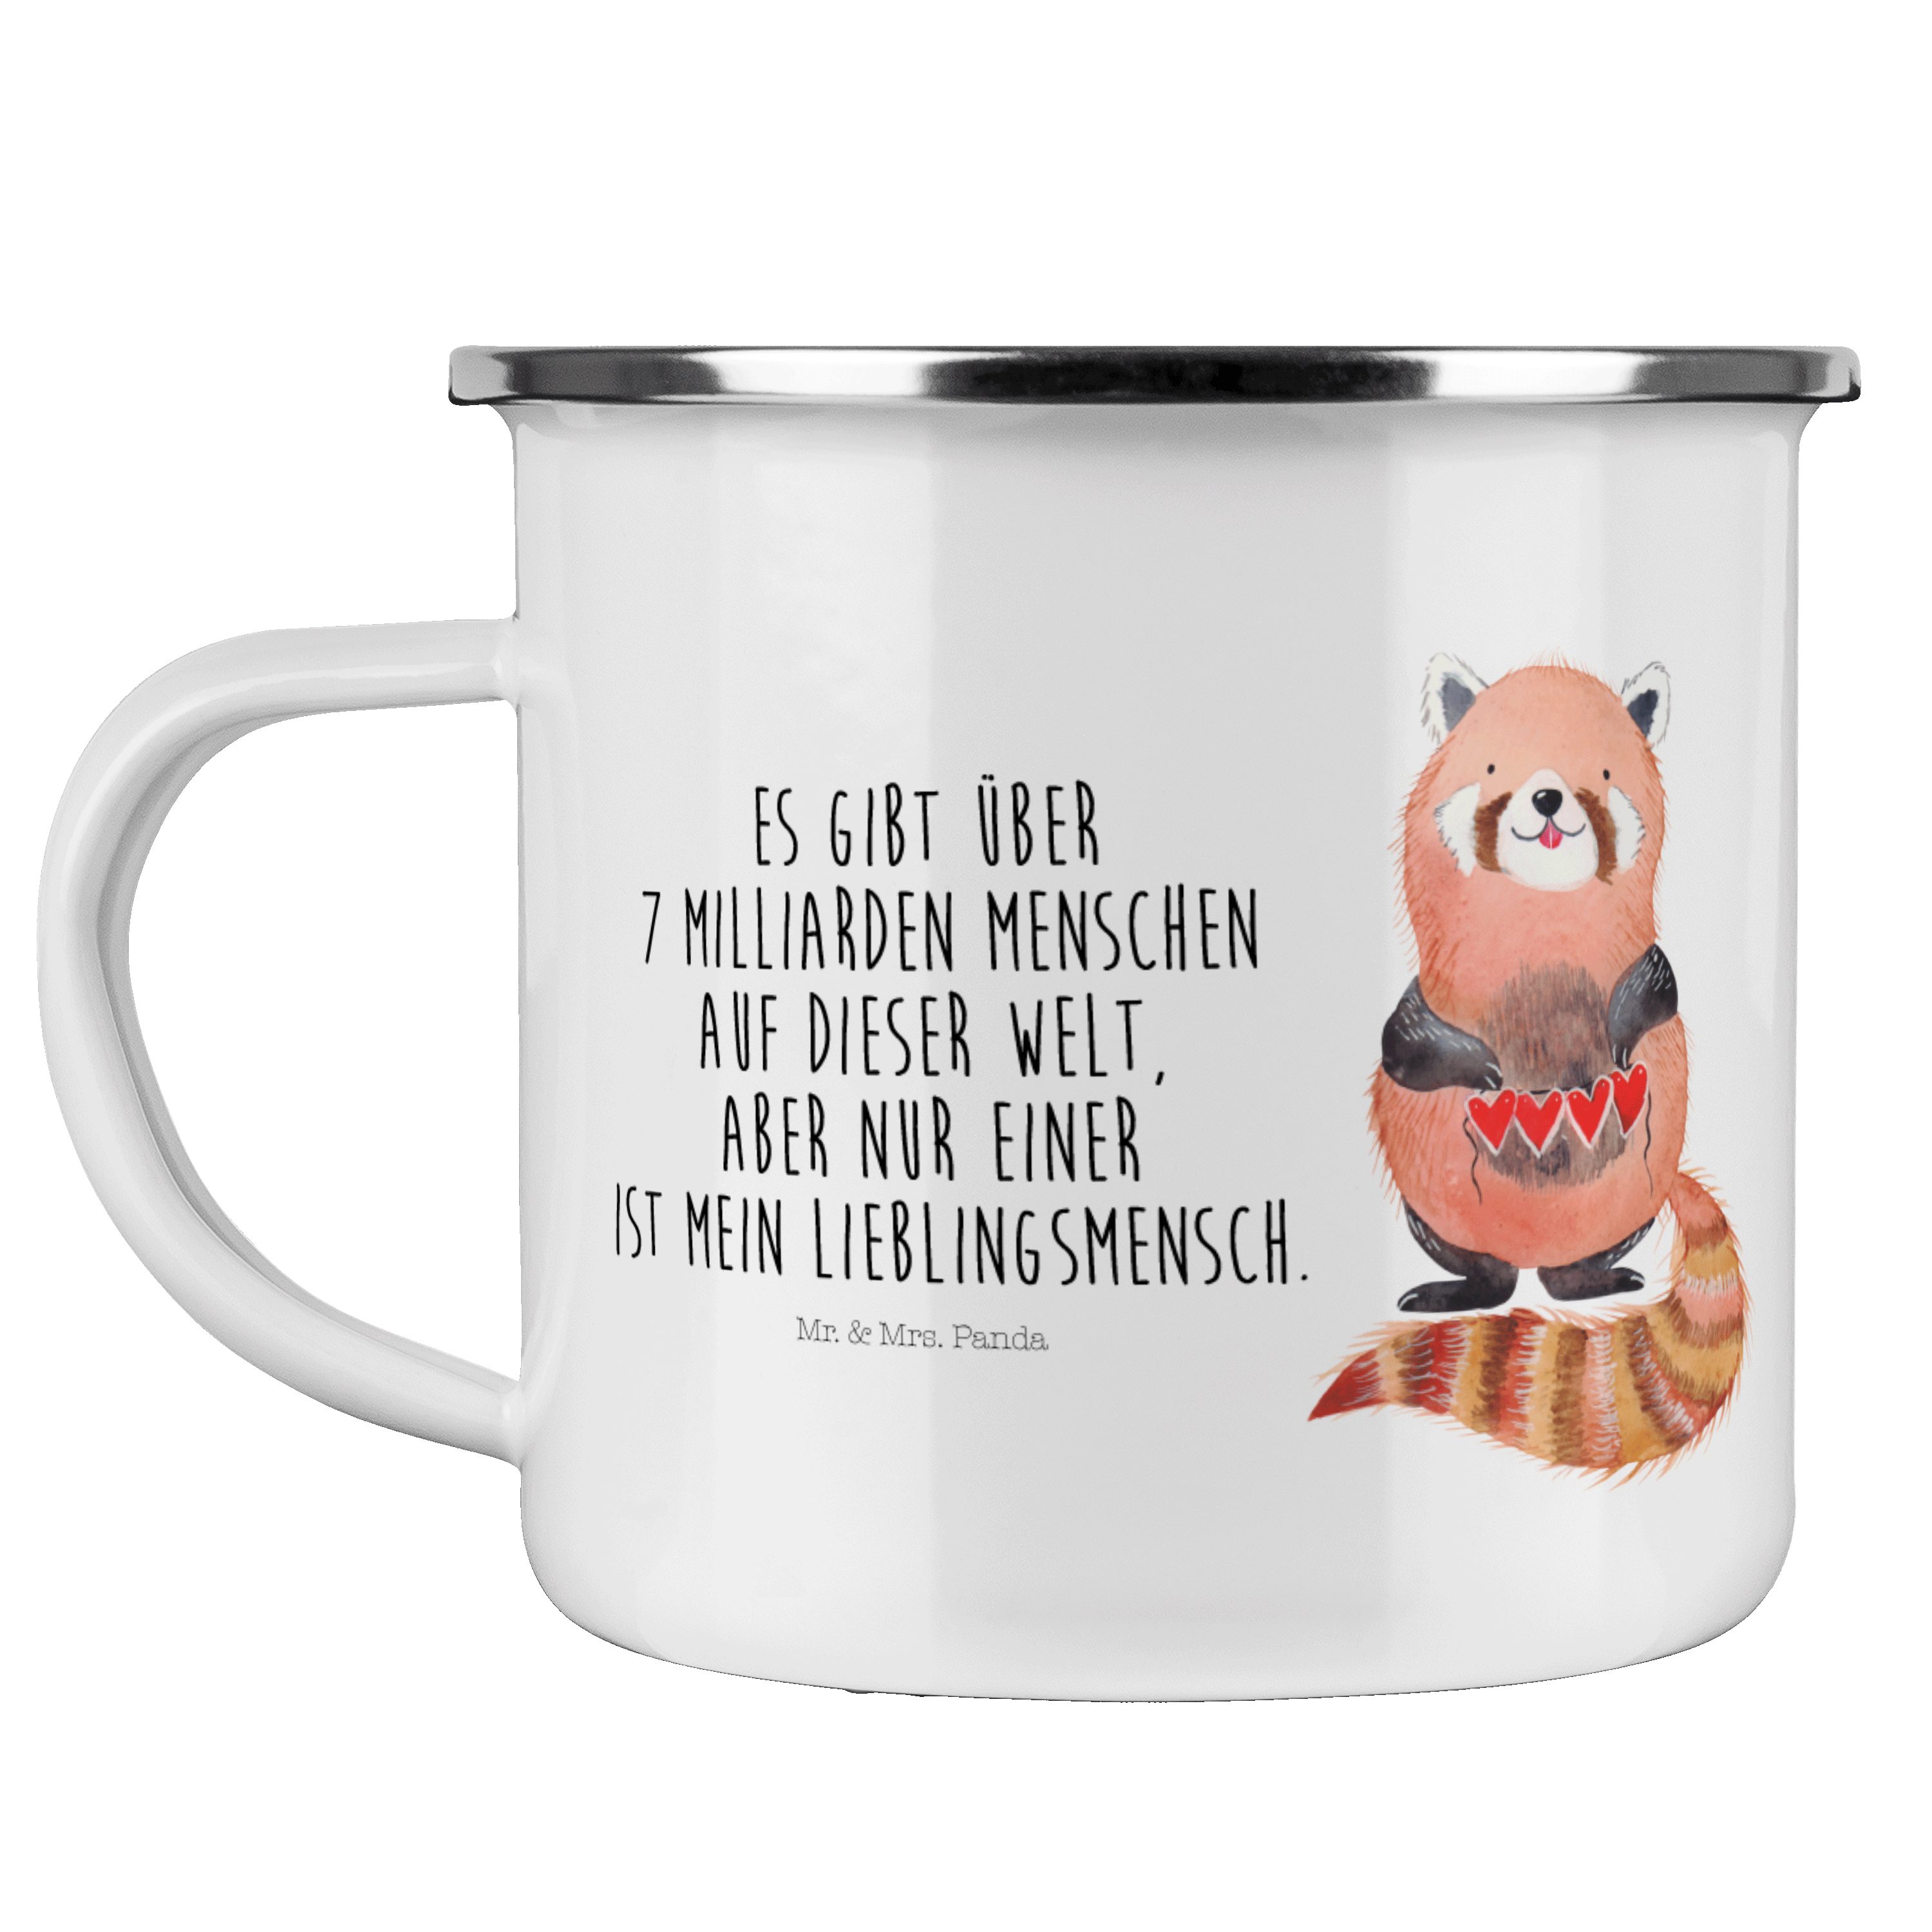 Mr. & Mrs. Panda Becher Roter Panda - Weiß - Geschenk, Emaille Trinkbecher, Emaille Campingbe, Emaille